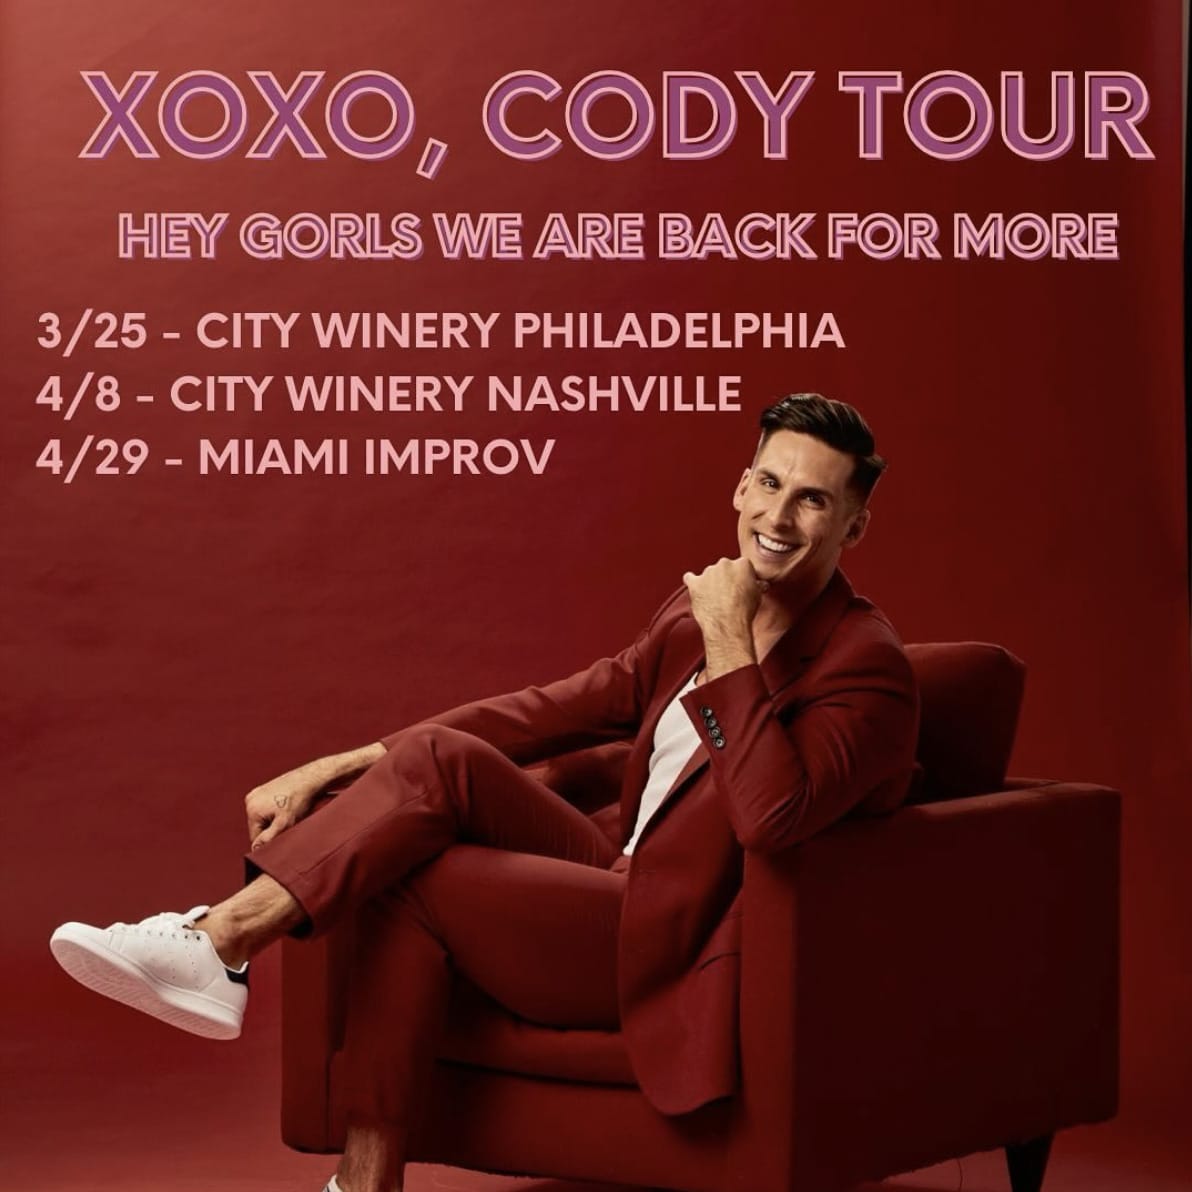 Cody Rigsby's new book tour dates. Image credit Cody's social media.